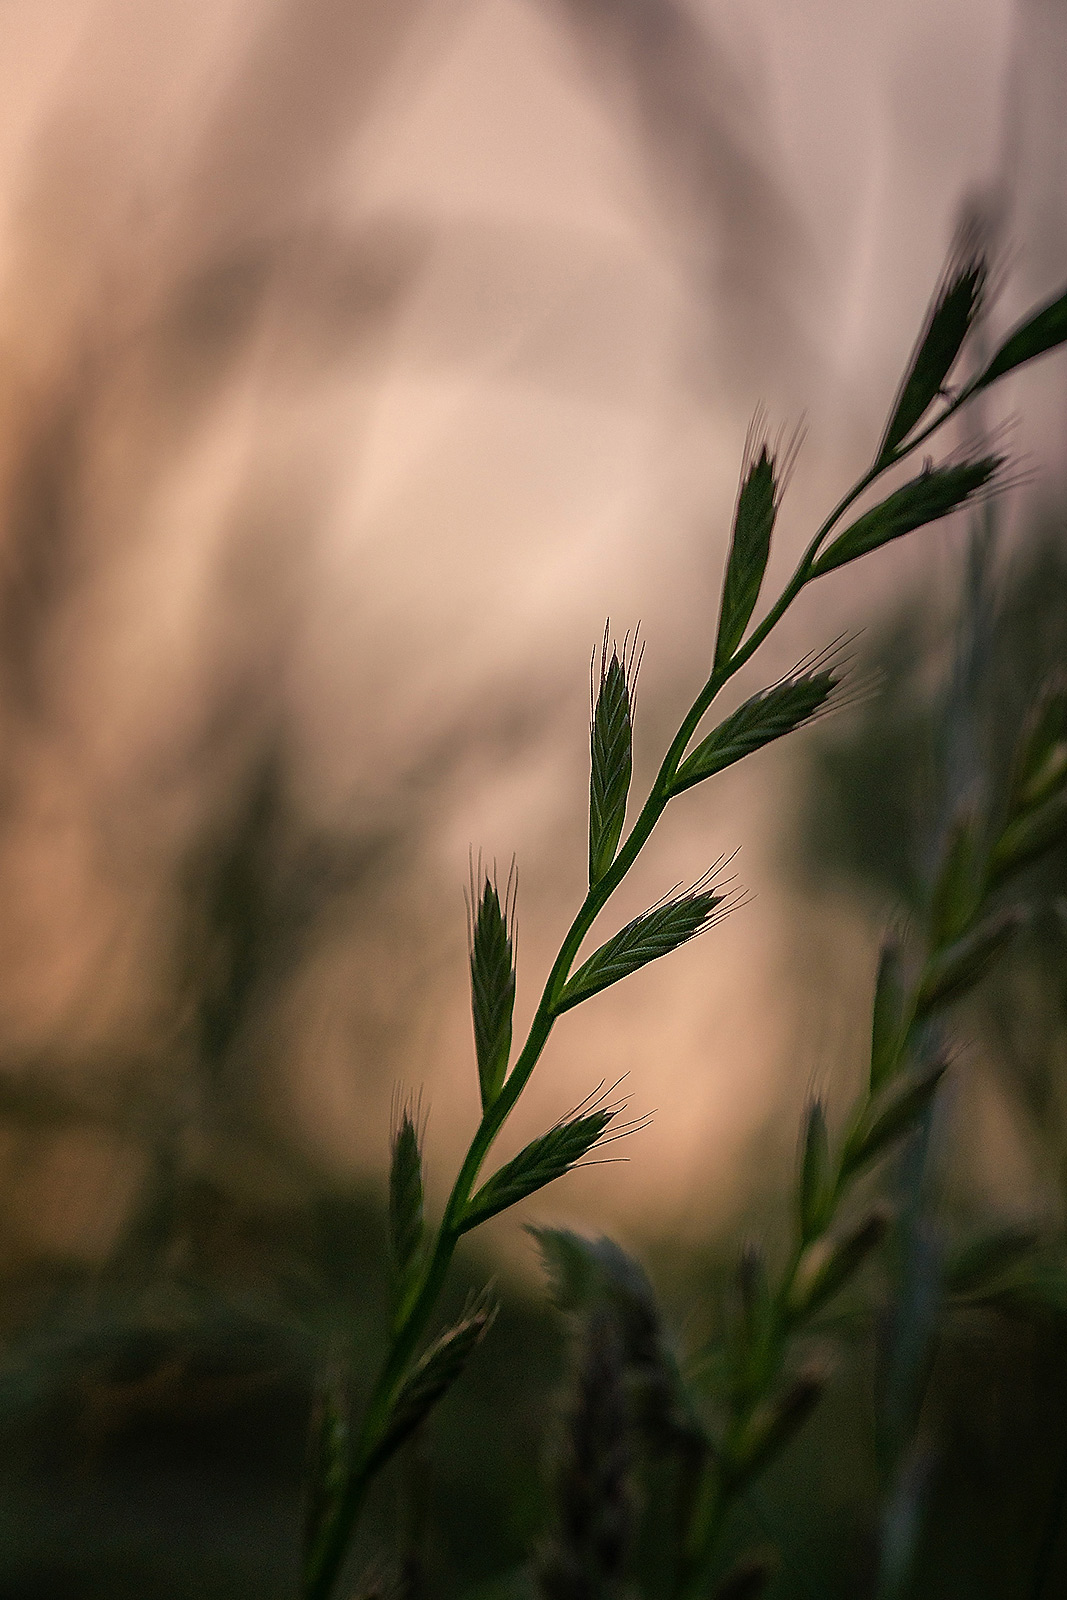 Macro close-up photograph of meadow grass in evening light, featuring Elymus repens (couch grass). Soft, warm light illuminates the scene as evening sets in, creating a beautifully composed photograph.